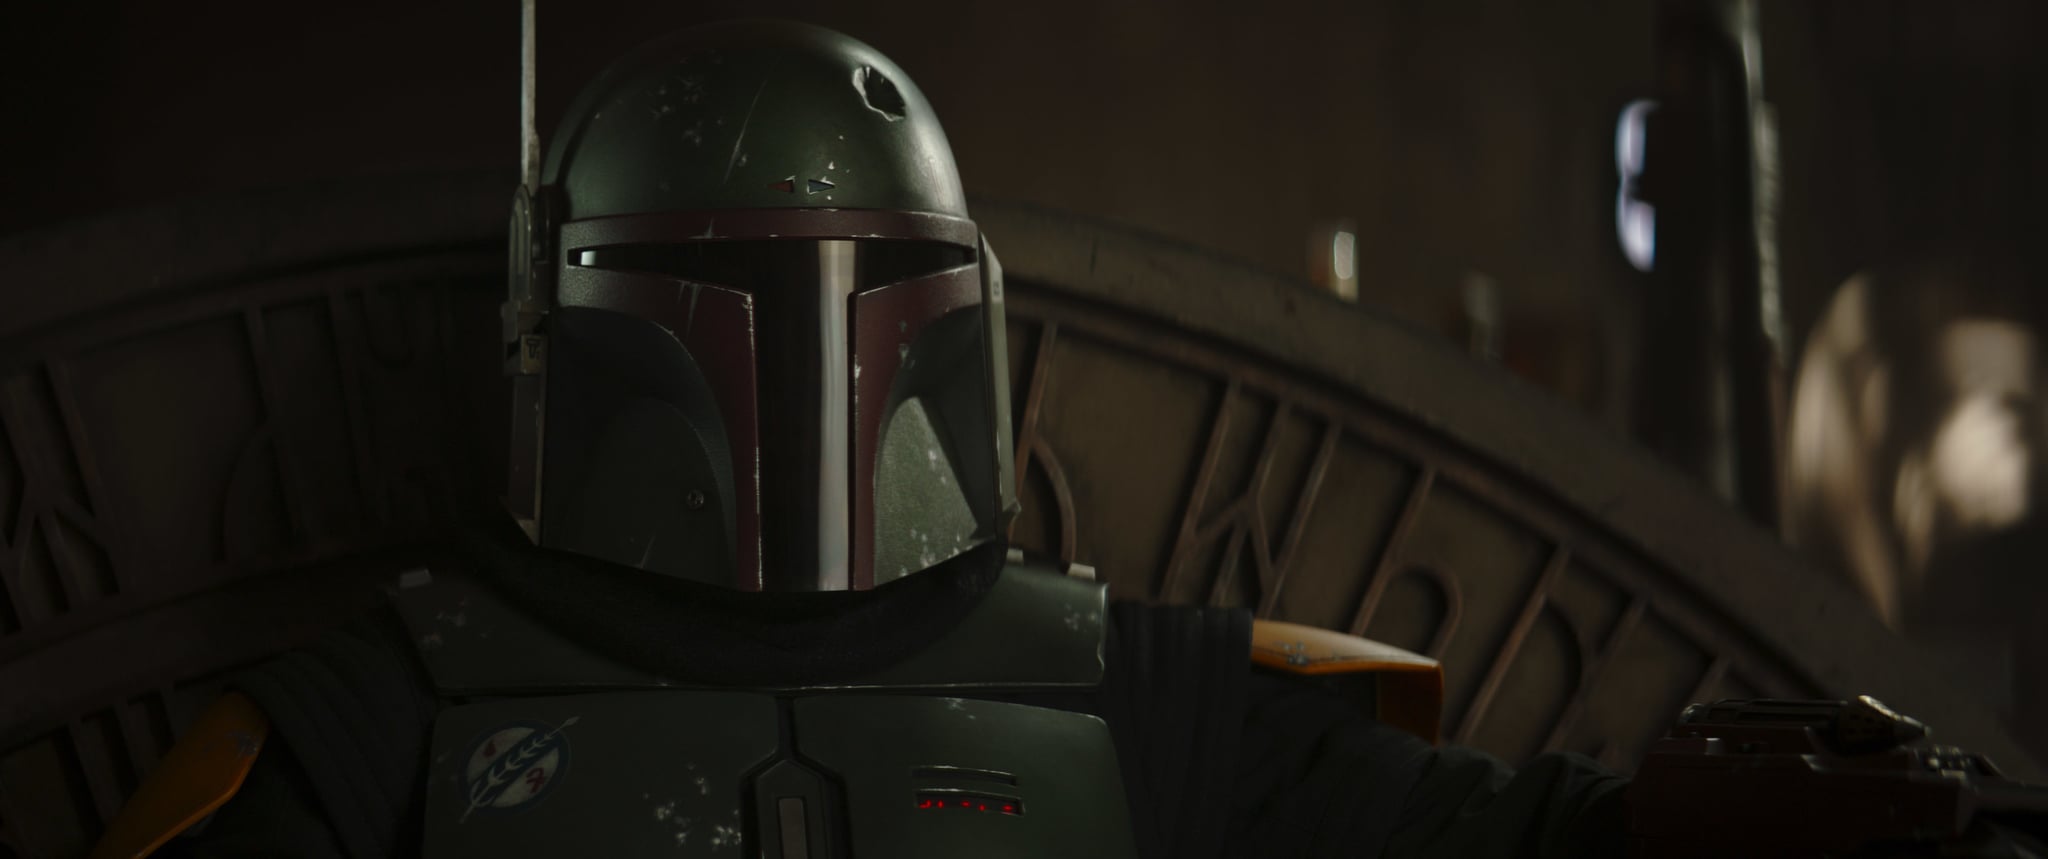 When Does The Mandalorian Take Place On The Star Wars Timeline?